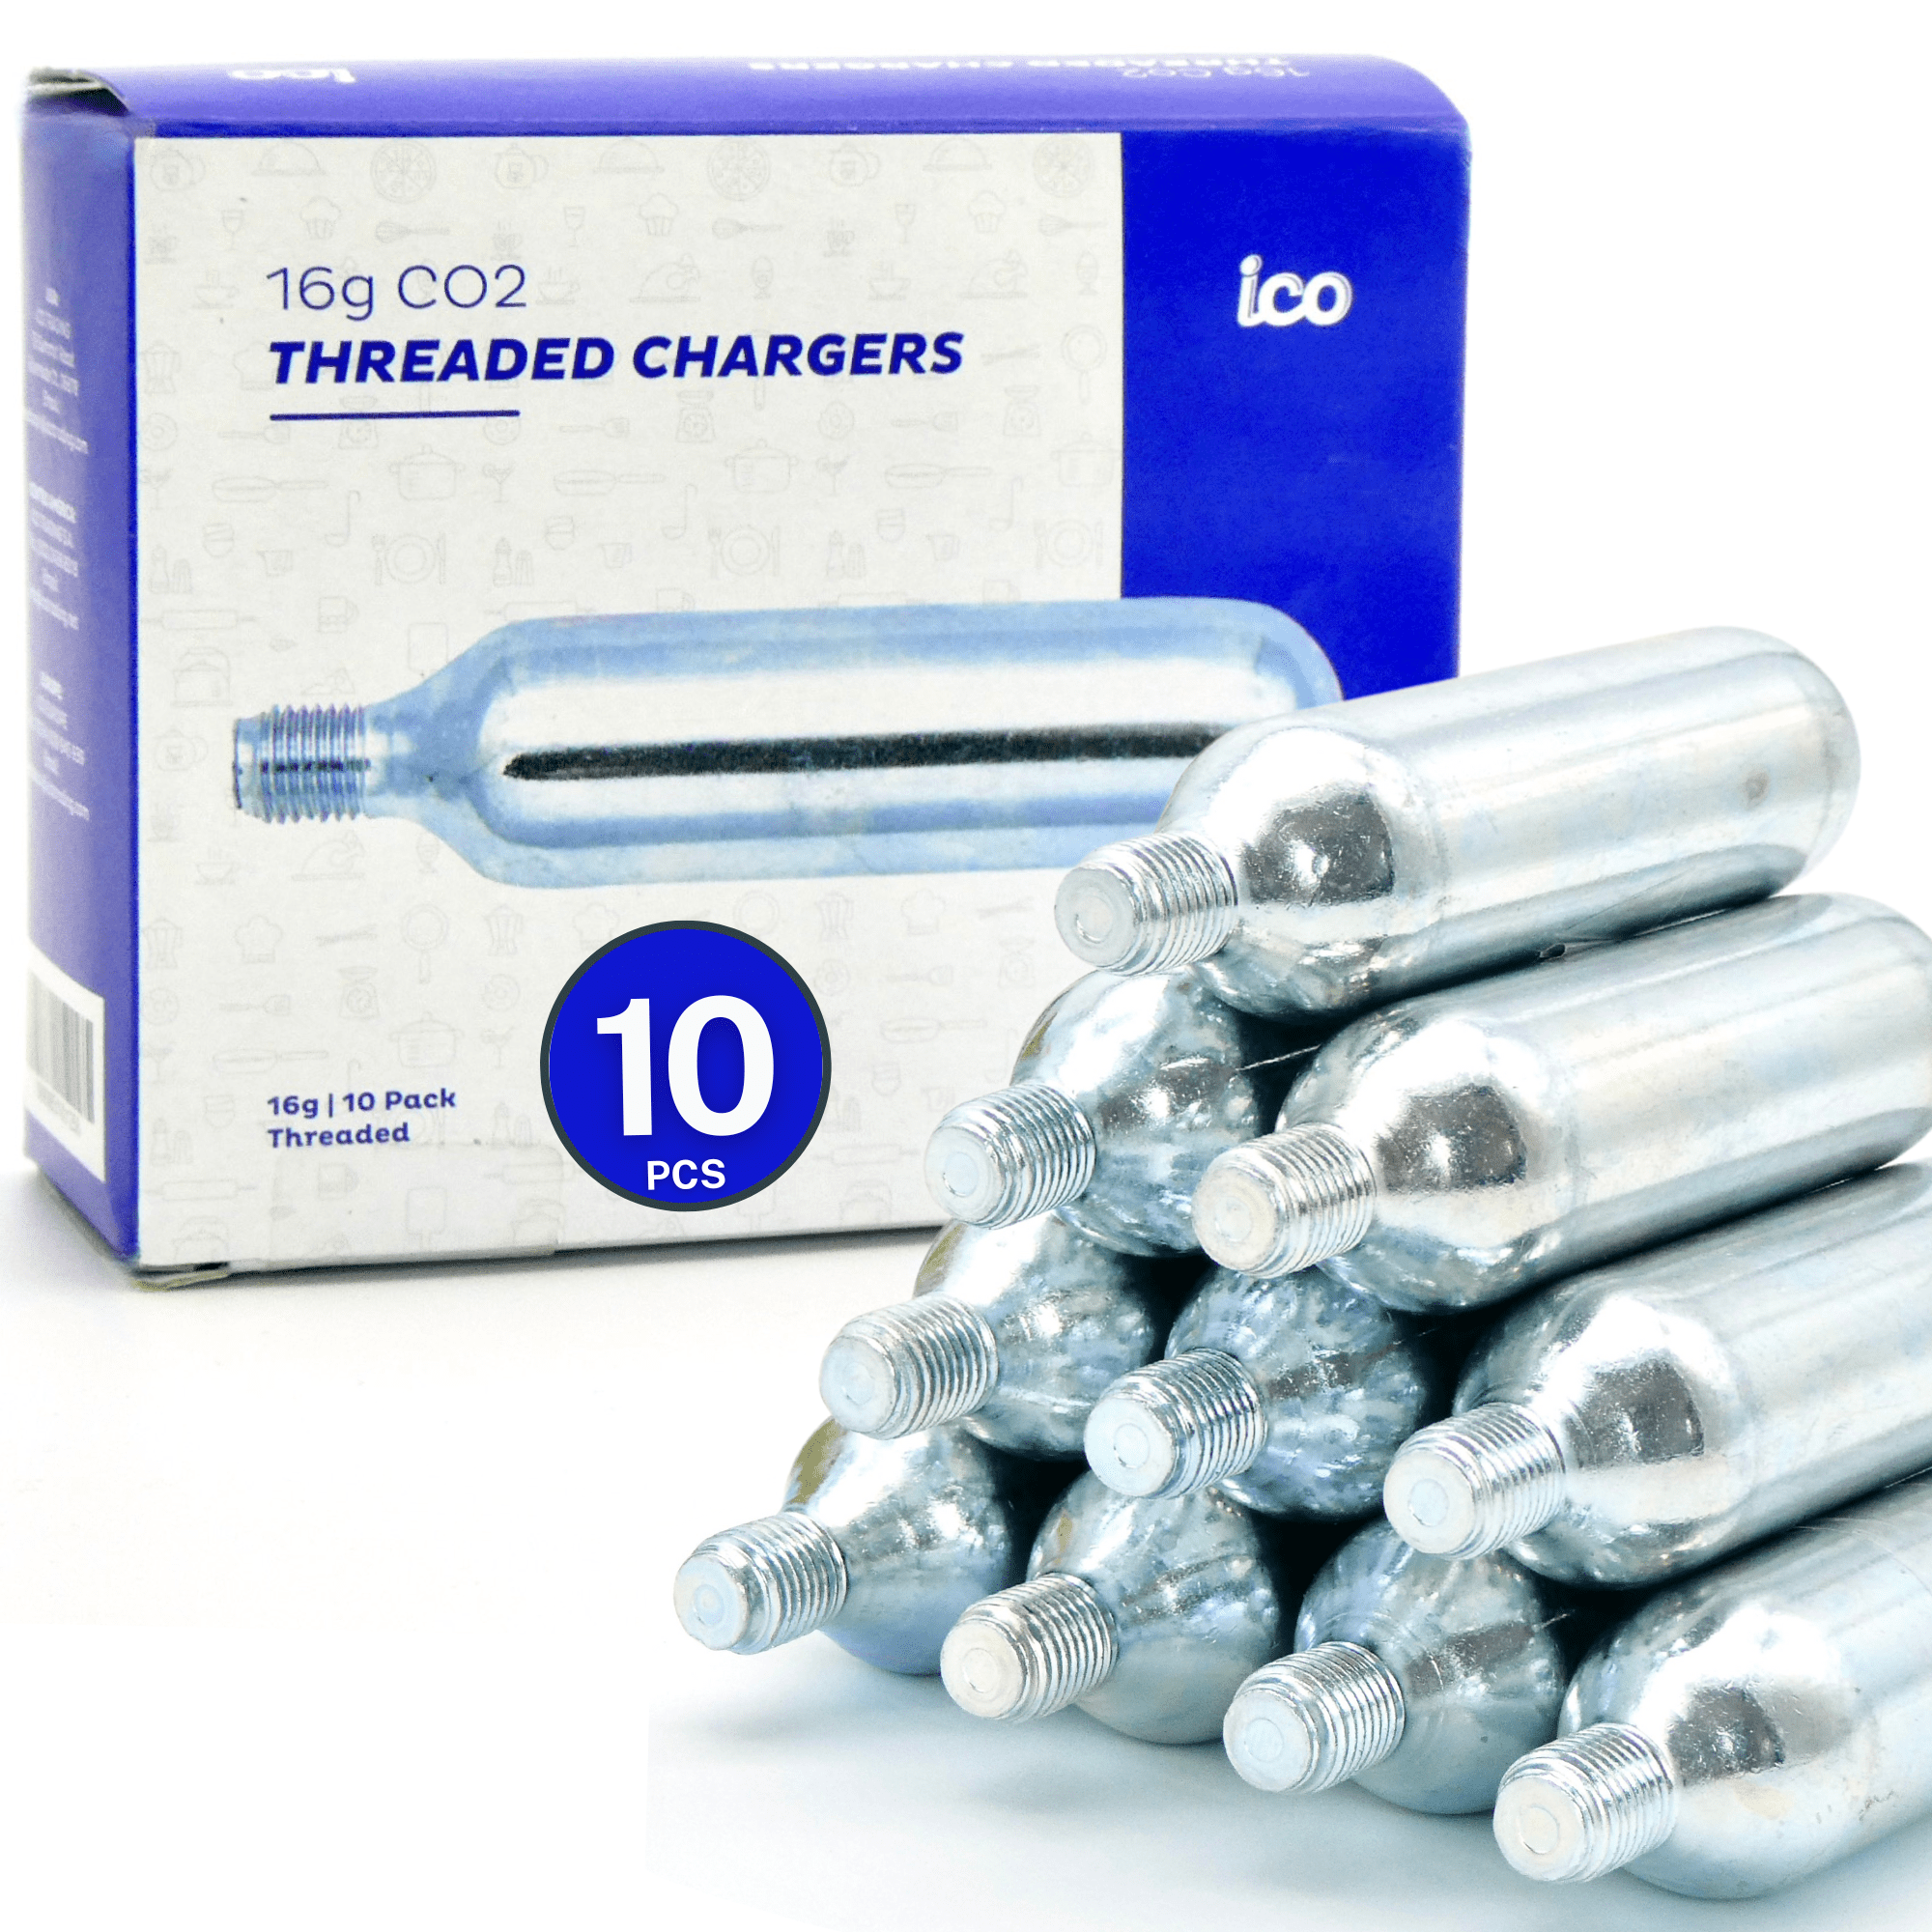 ICO 16g CO2 Cartridge Carbon Dioxide Gas for Bike Tire Inflator and Food  Grade for Beer, THREADED, 30 Count 